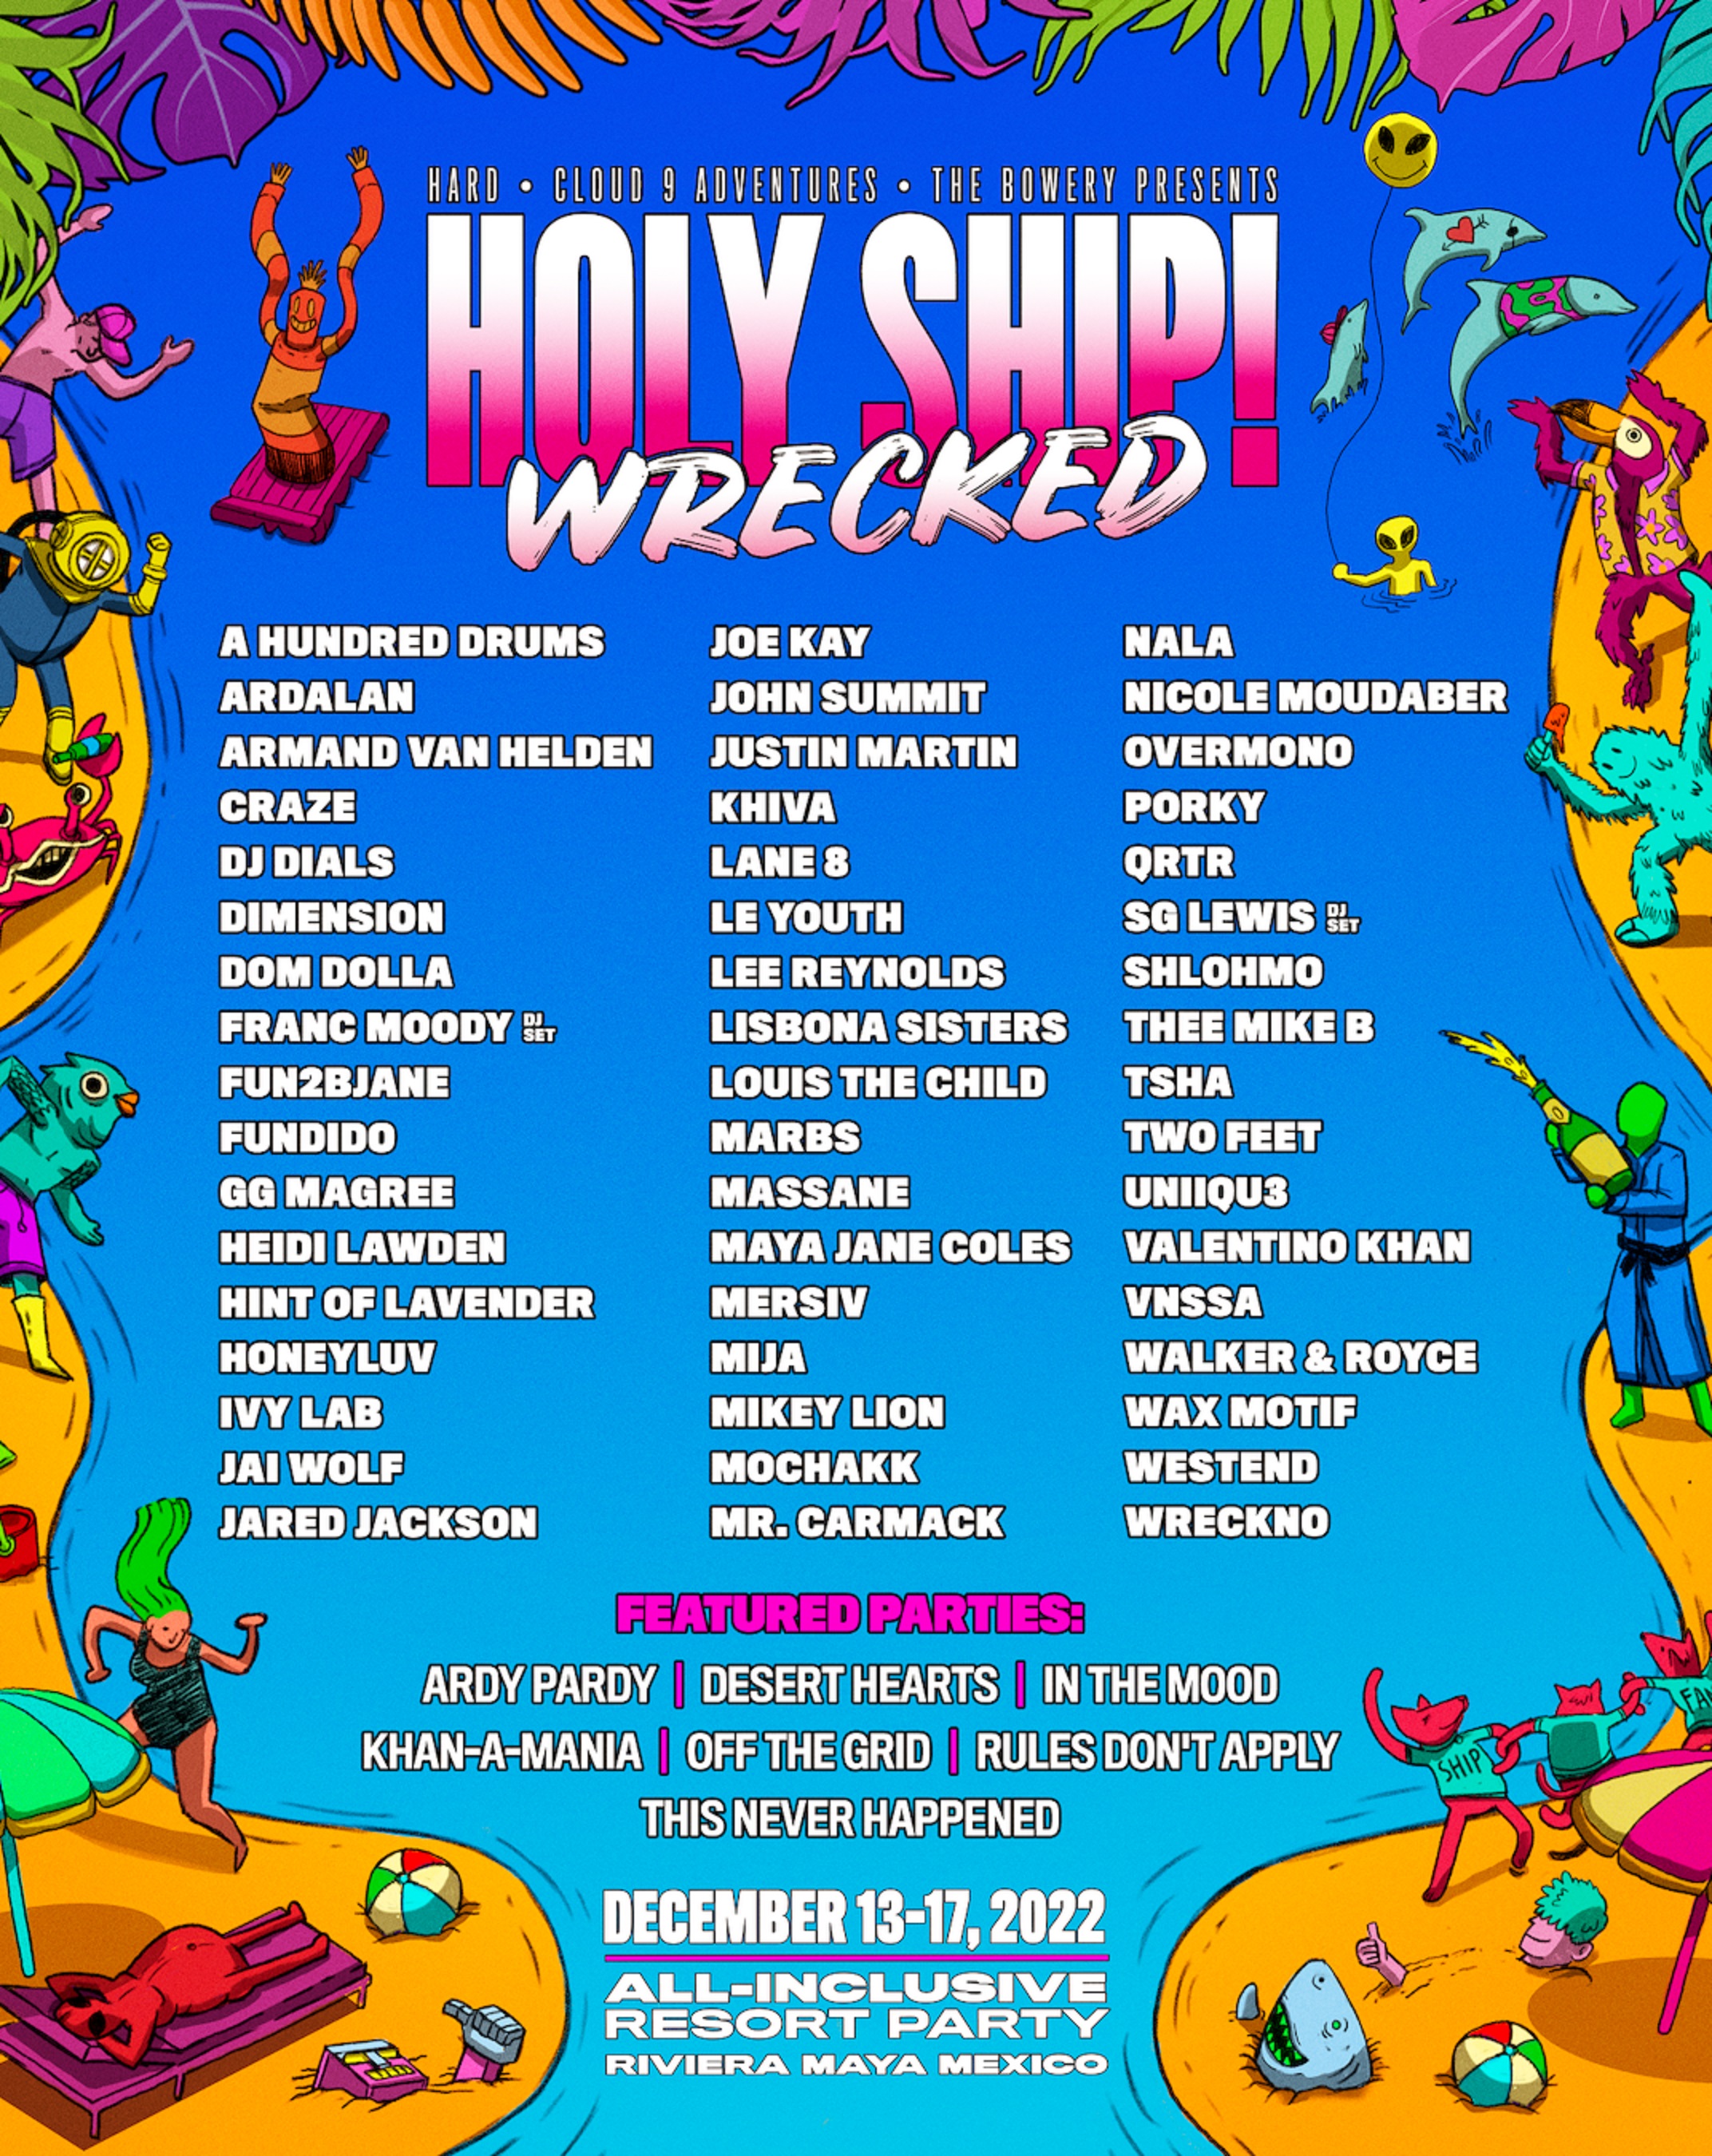  Holy Ship! Wrecked Announces Lineup for December 13-17 Event